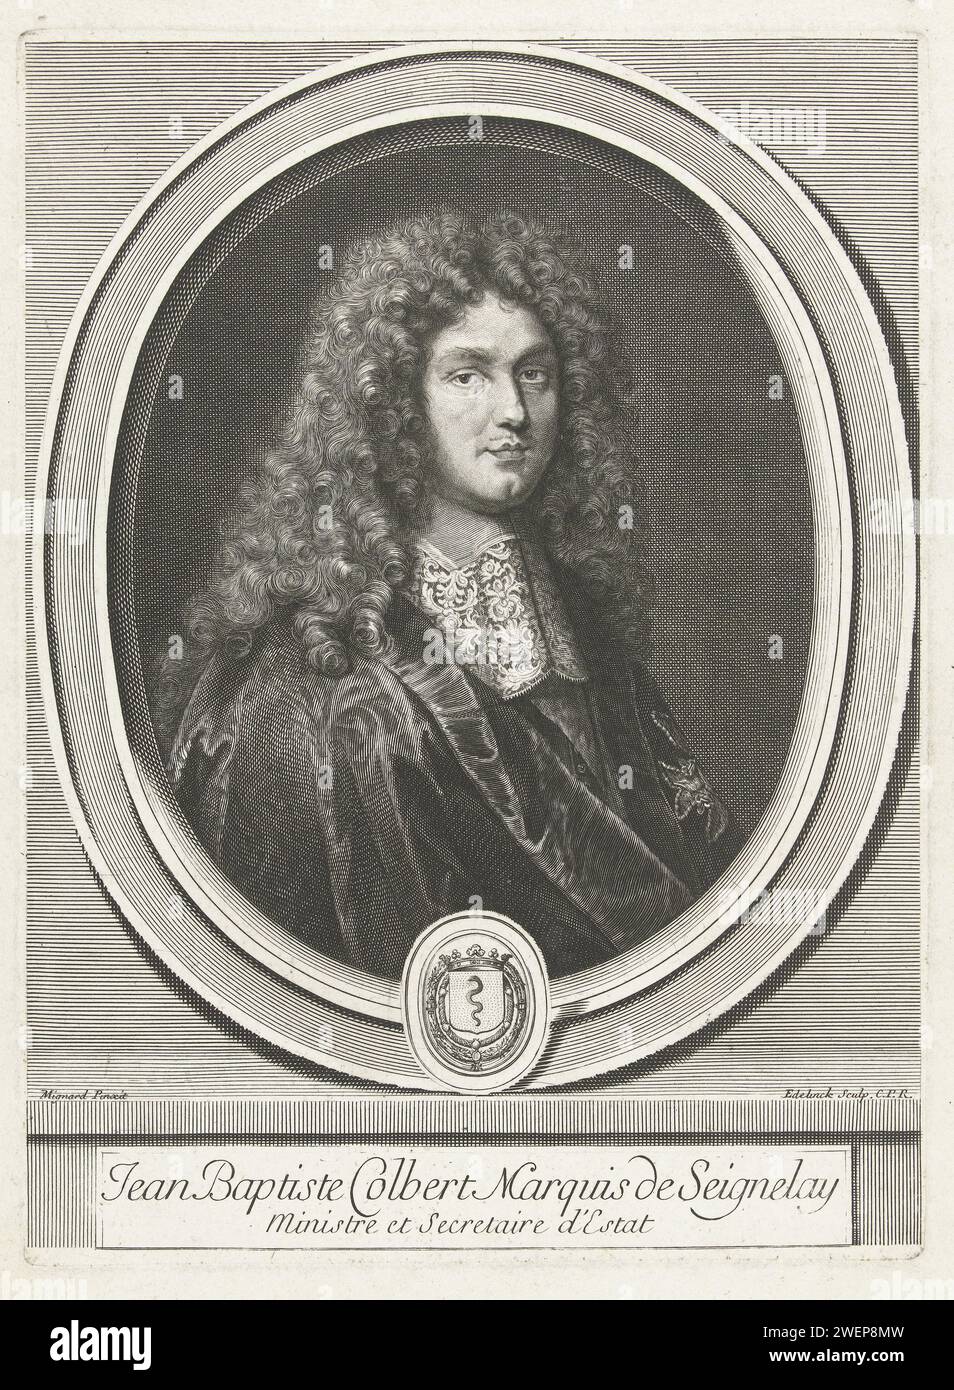 Portret van Jean-Baptiste Colbert de Seignelay, Gerard Edelinck, after Pierre Mignard (1612-1695), 1666-1707 print Portrait of the French politician Jean-Baptiste Antoine Colbert, Marquis van Seignelay (1651-1690), depicted in ovale accompaniment with weapon.  paper engraving Stock Photo